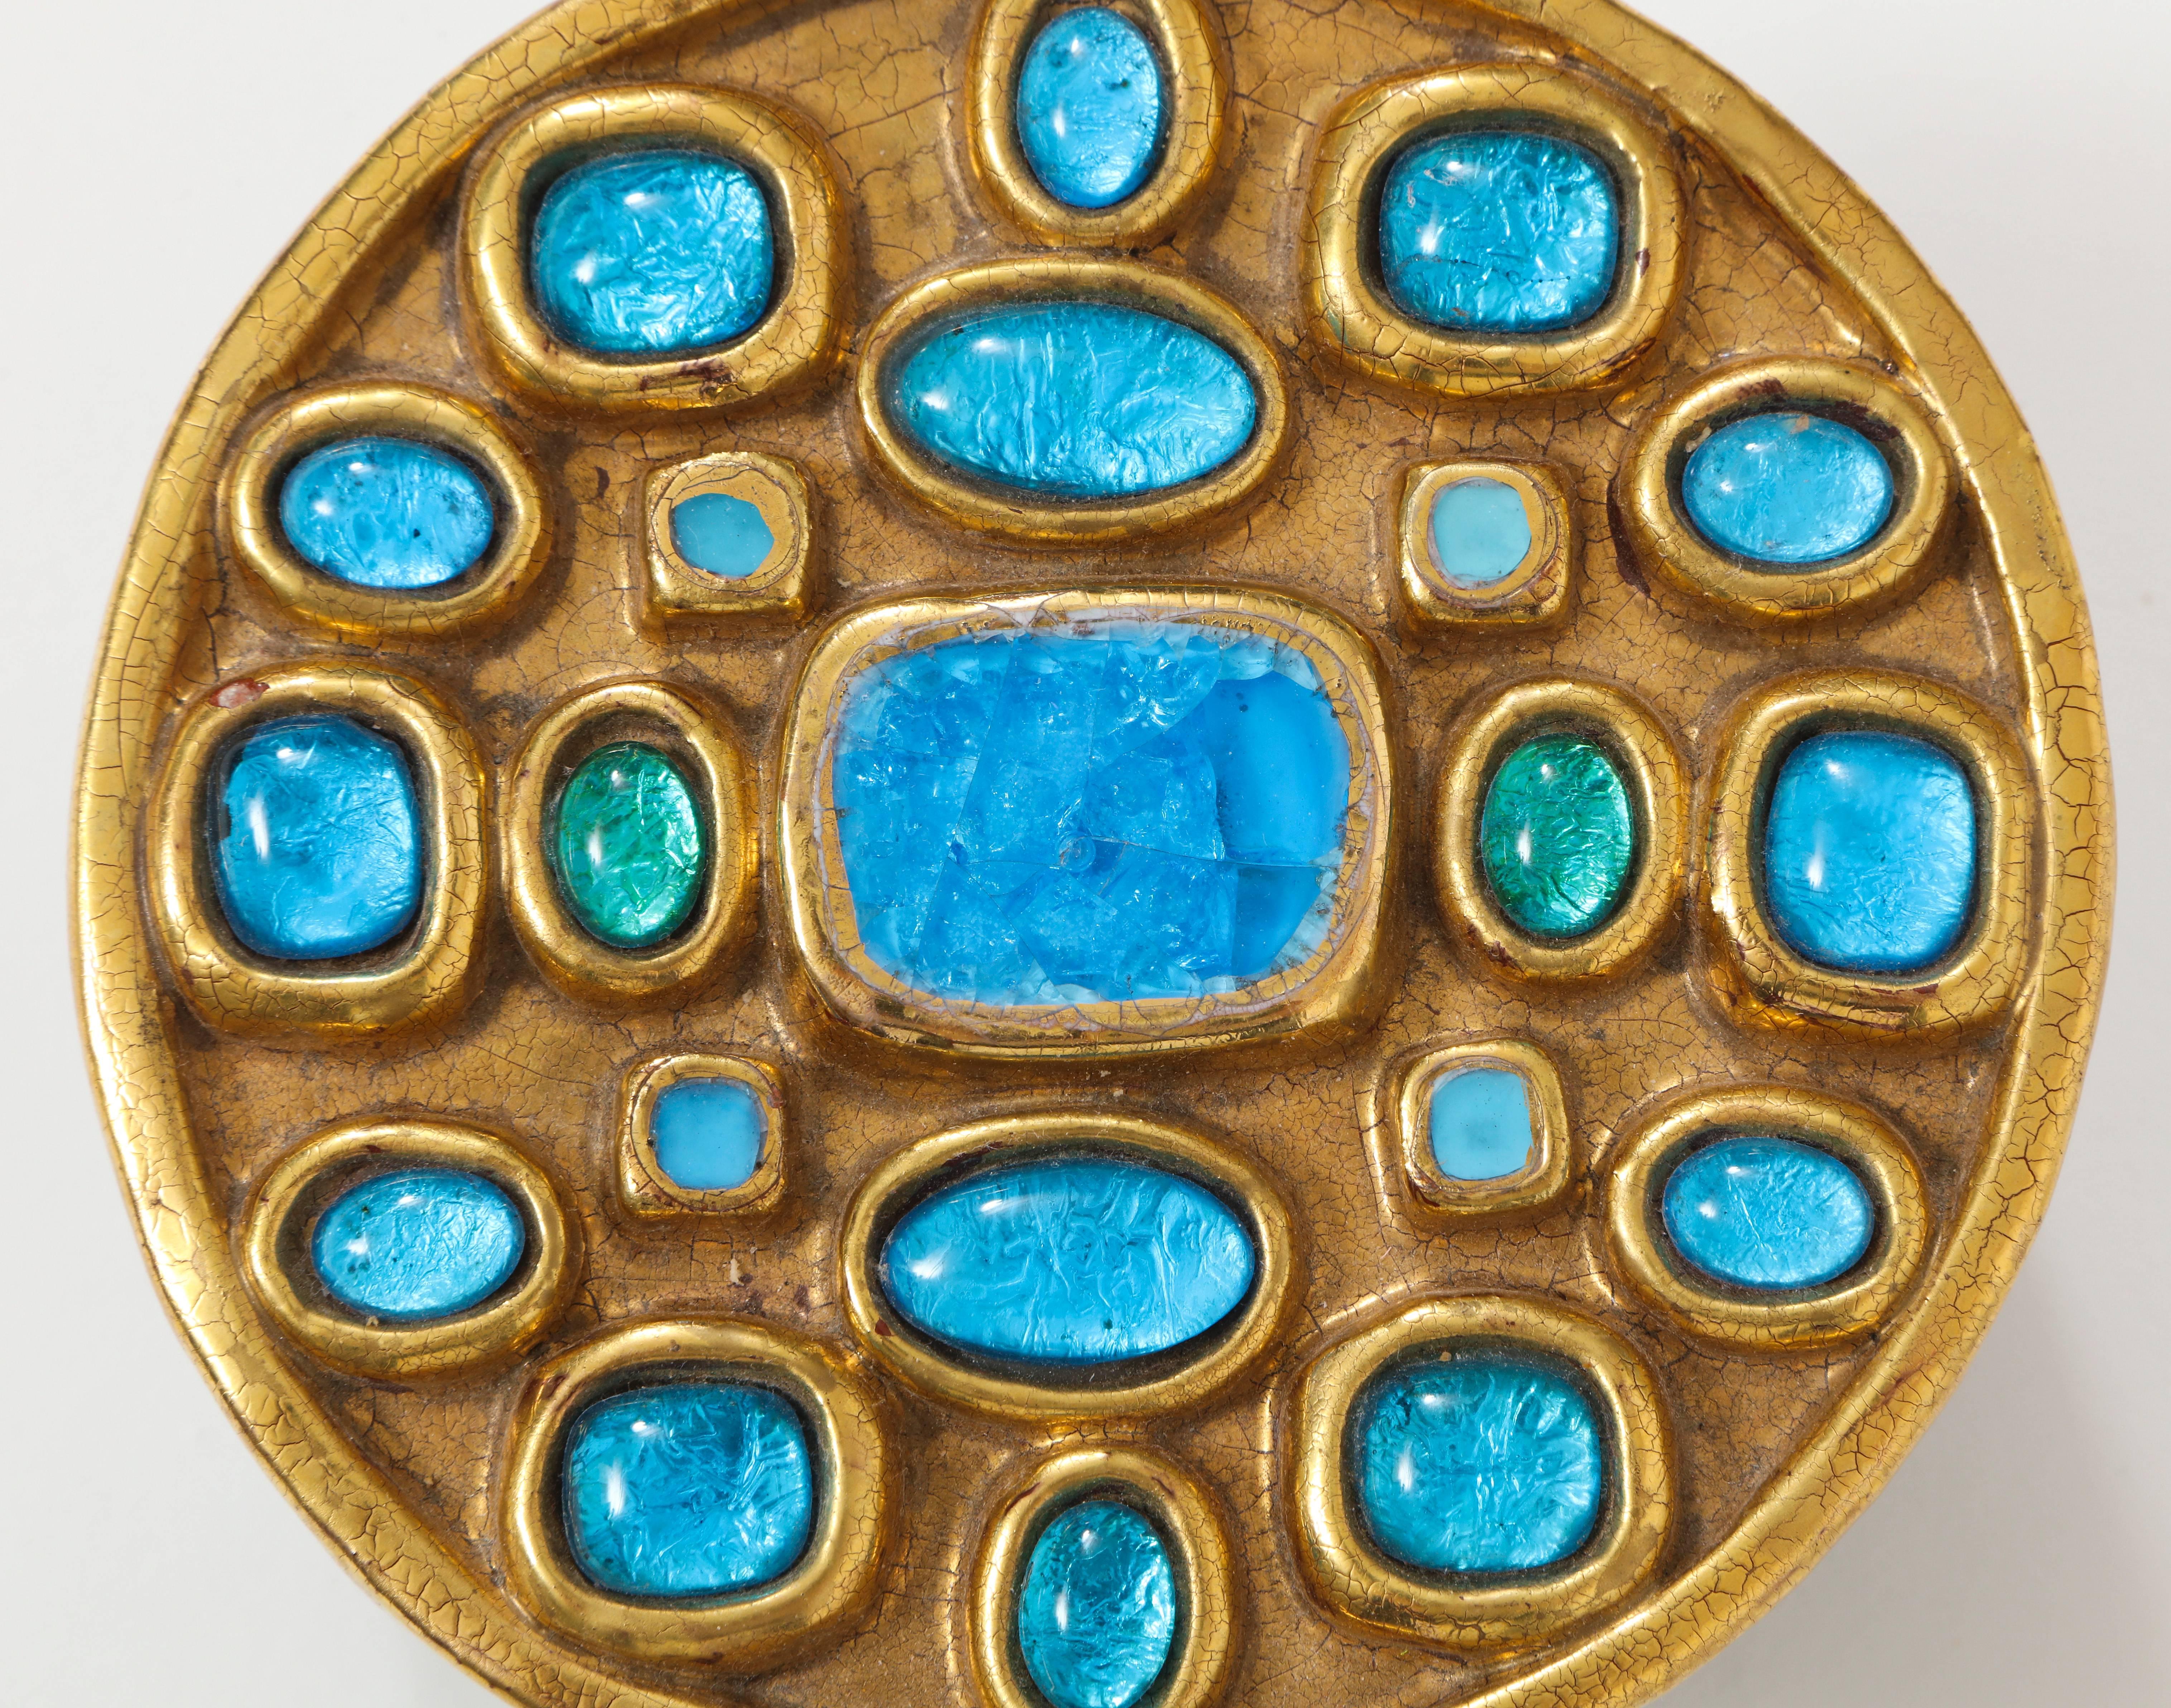 Lembo Attributed Ceramic Jewel Box Gold Enamel Blue Stones, France, 1960, 1970
This is a beautiful box that is made in the 1960s, France
attributed to Francois Lembo.
The bottom is made of wood and the top is glazed ceramic with gold enamel and